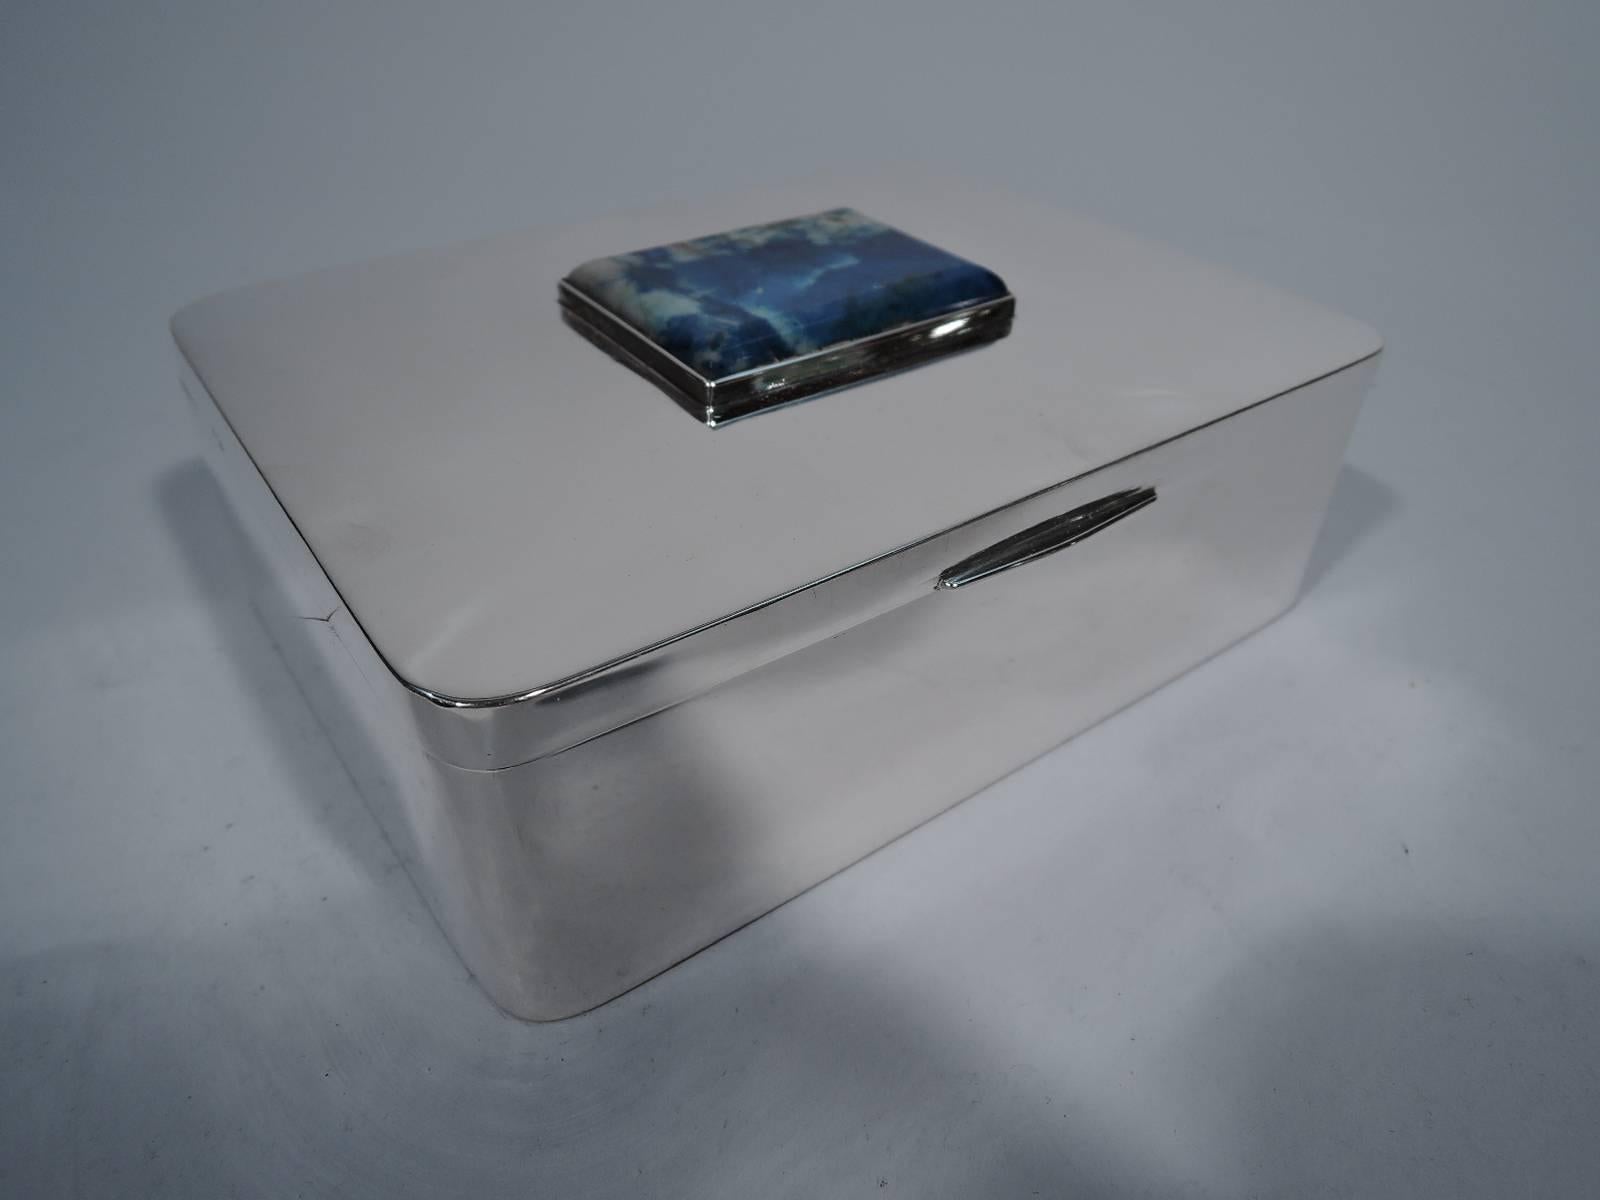 Chic Portuguese 916 silver box. Rectangular with curved covers. Cover hinged and inset with rectangular lapis lazuli plaque. Box interior cedar lined. Fine form and craftsmanship. Hallmark includes Lisbon retailer's name W. A. Sarmento. Very good